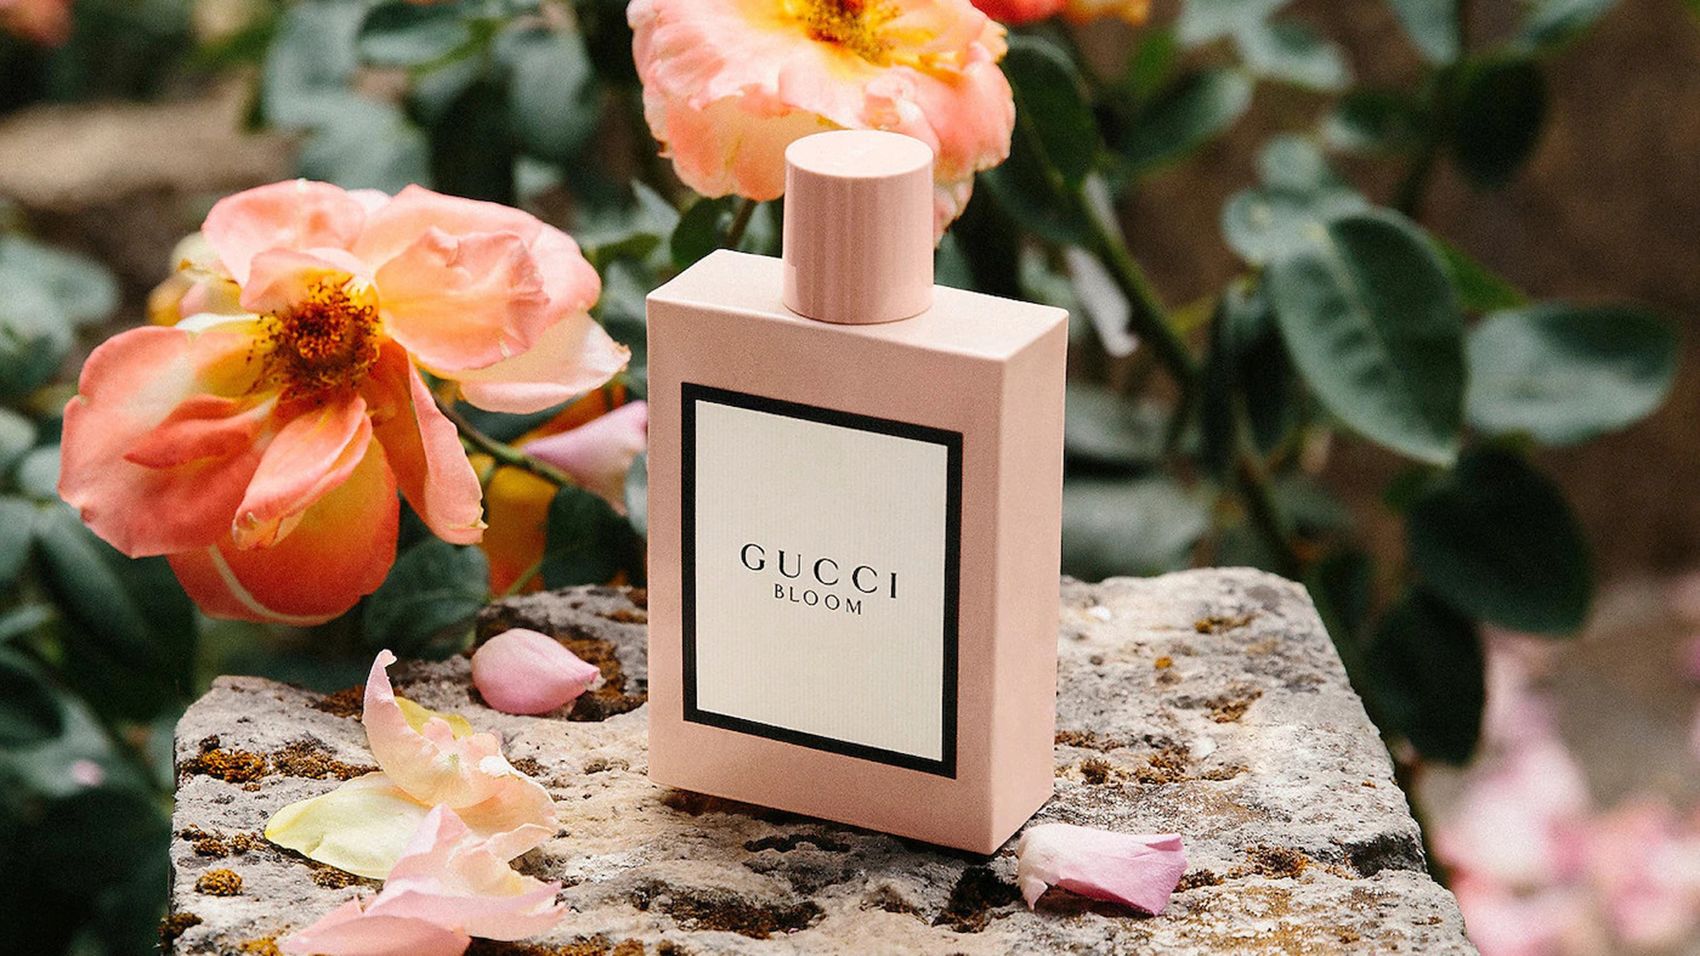 20 best perfumes for women in 2022 that she’ll love this Mother’s Day